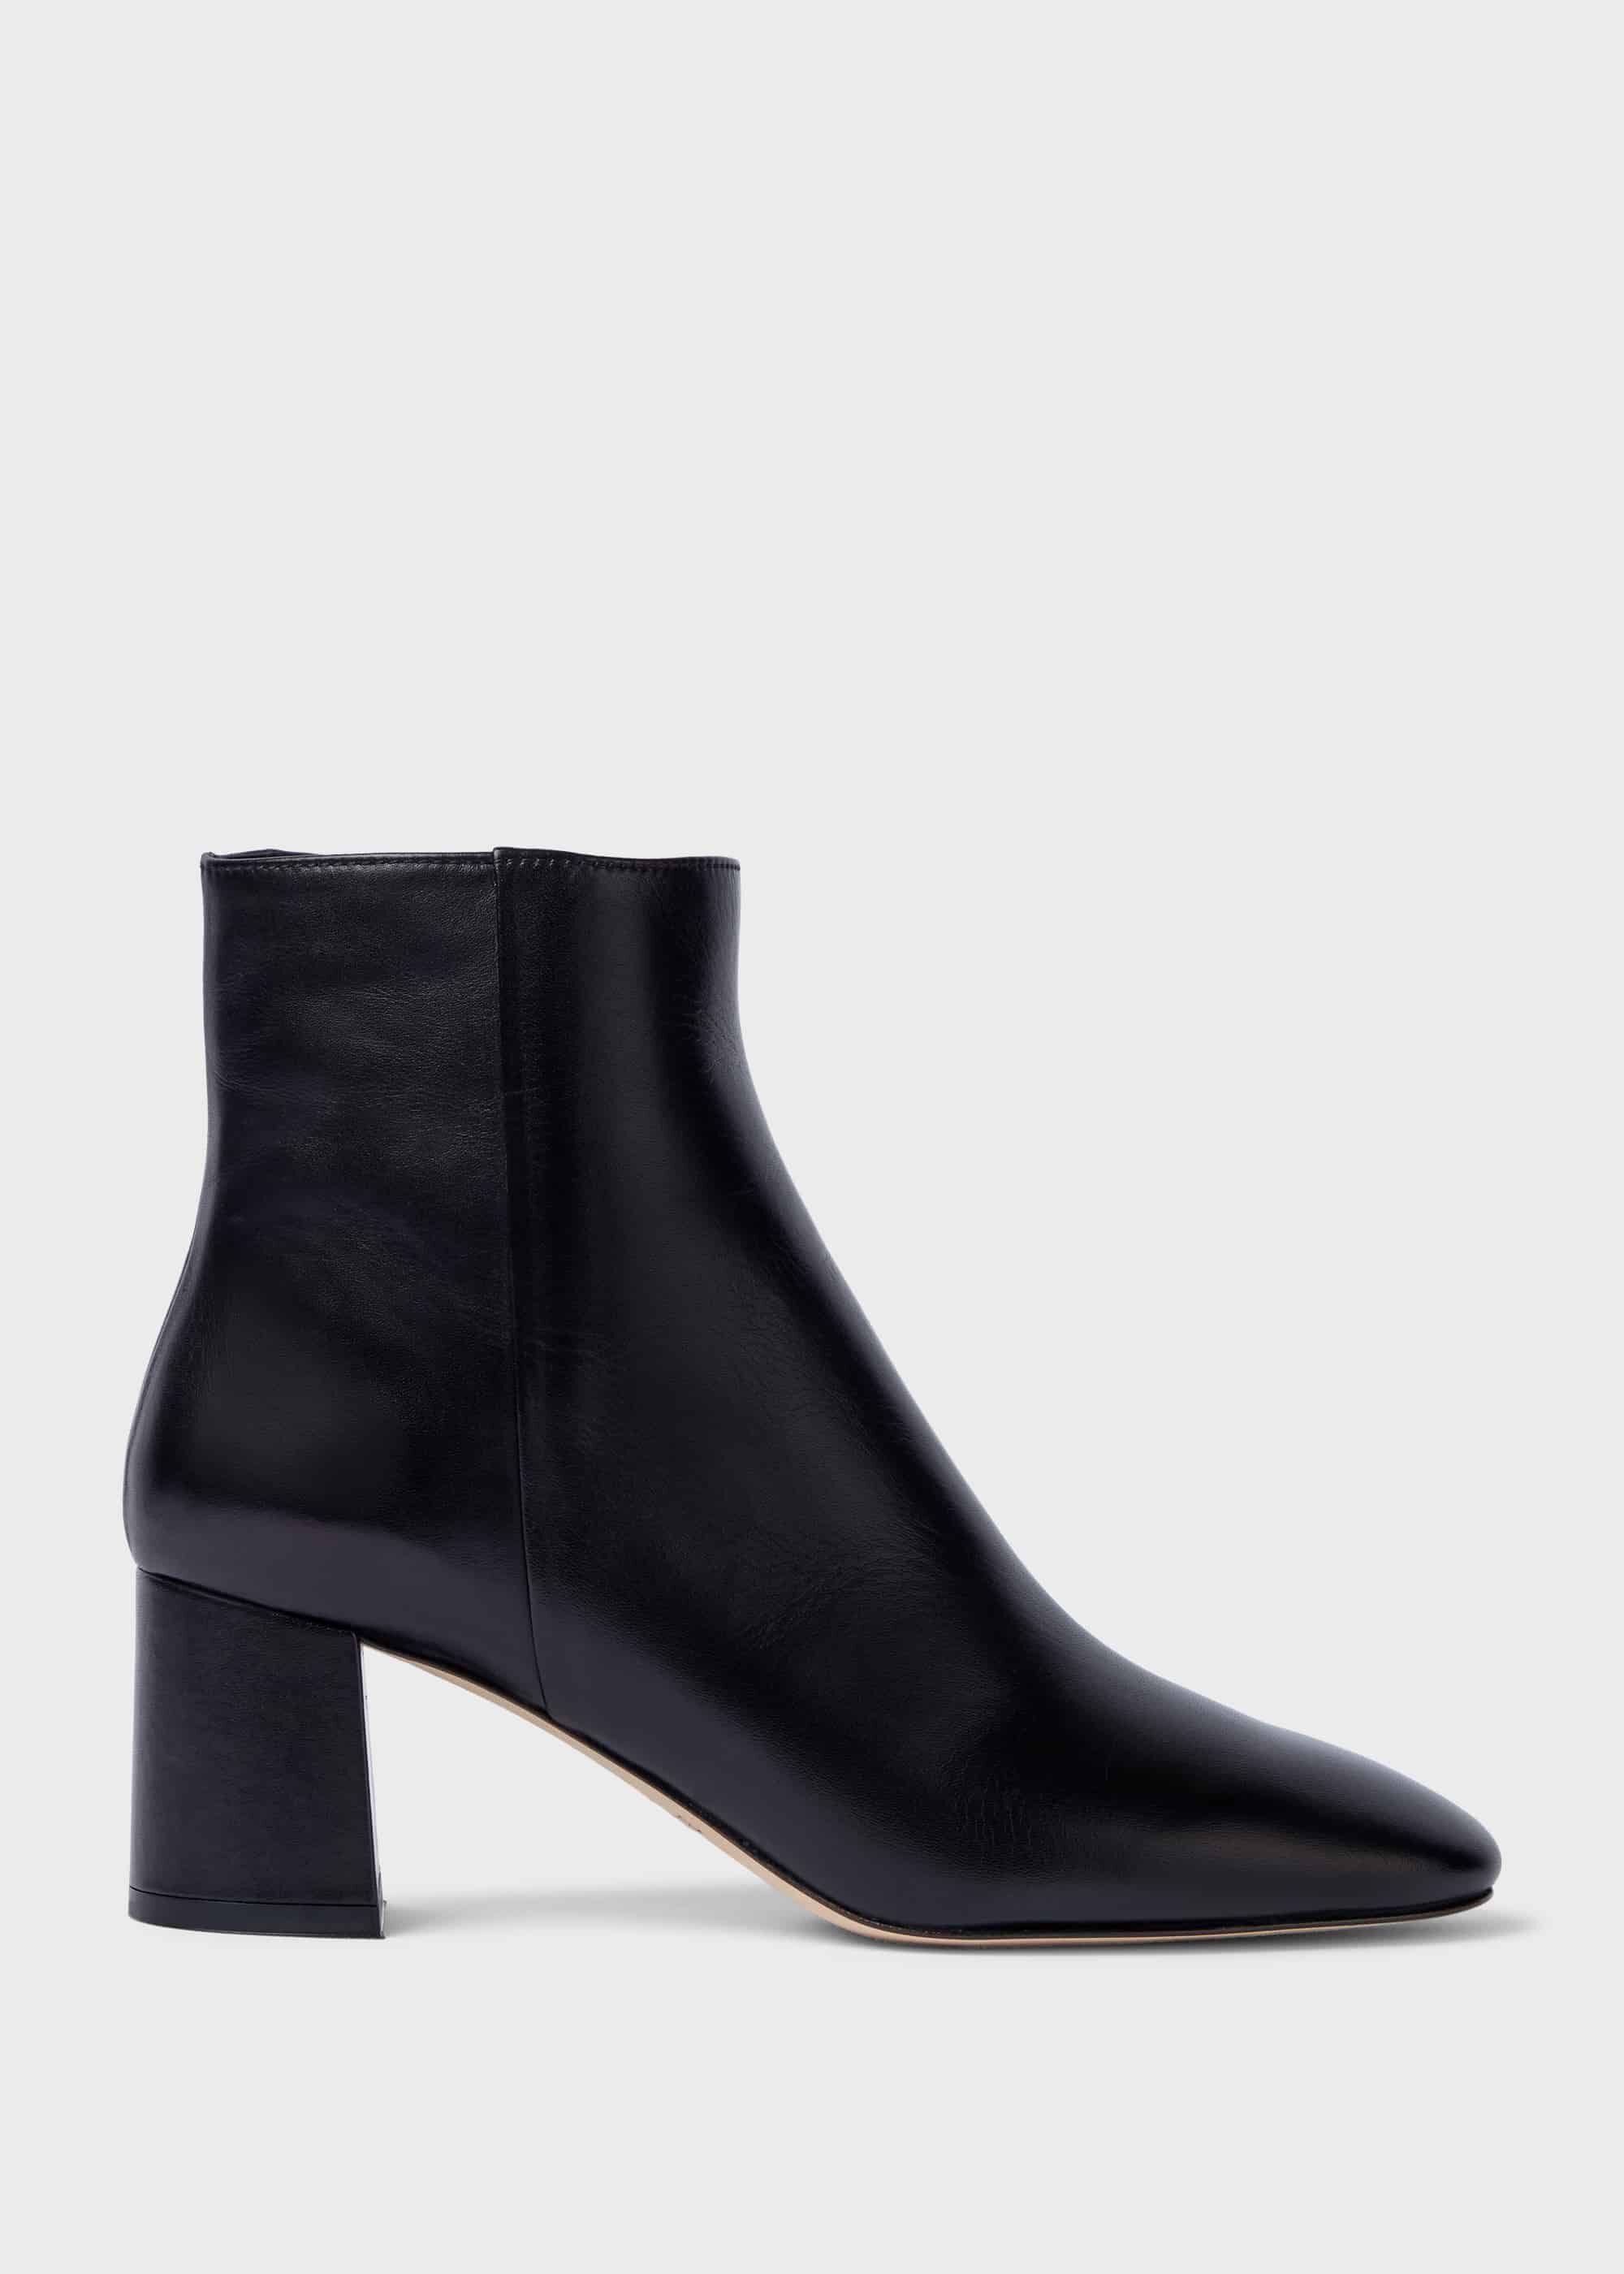 black block heel ankle boots leather